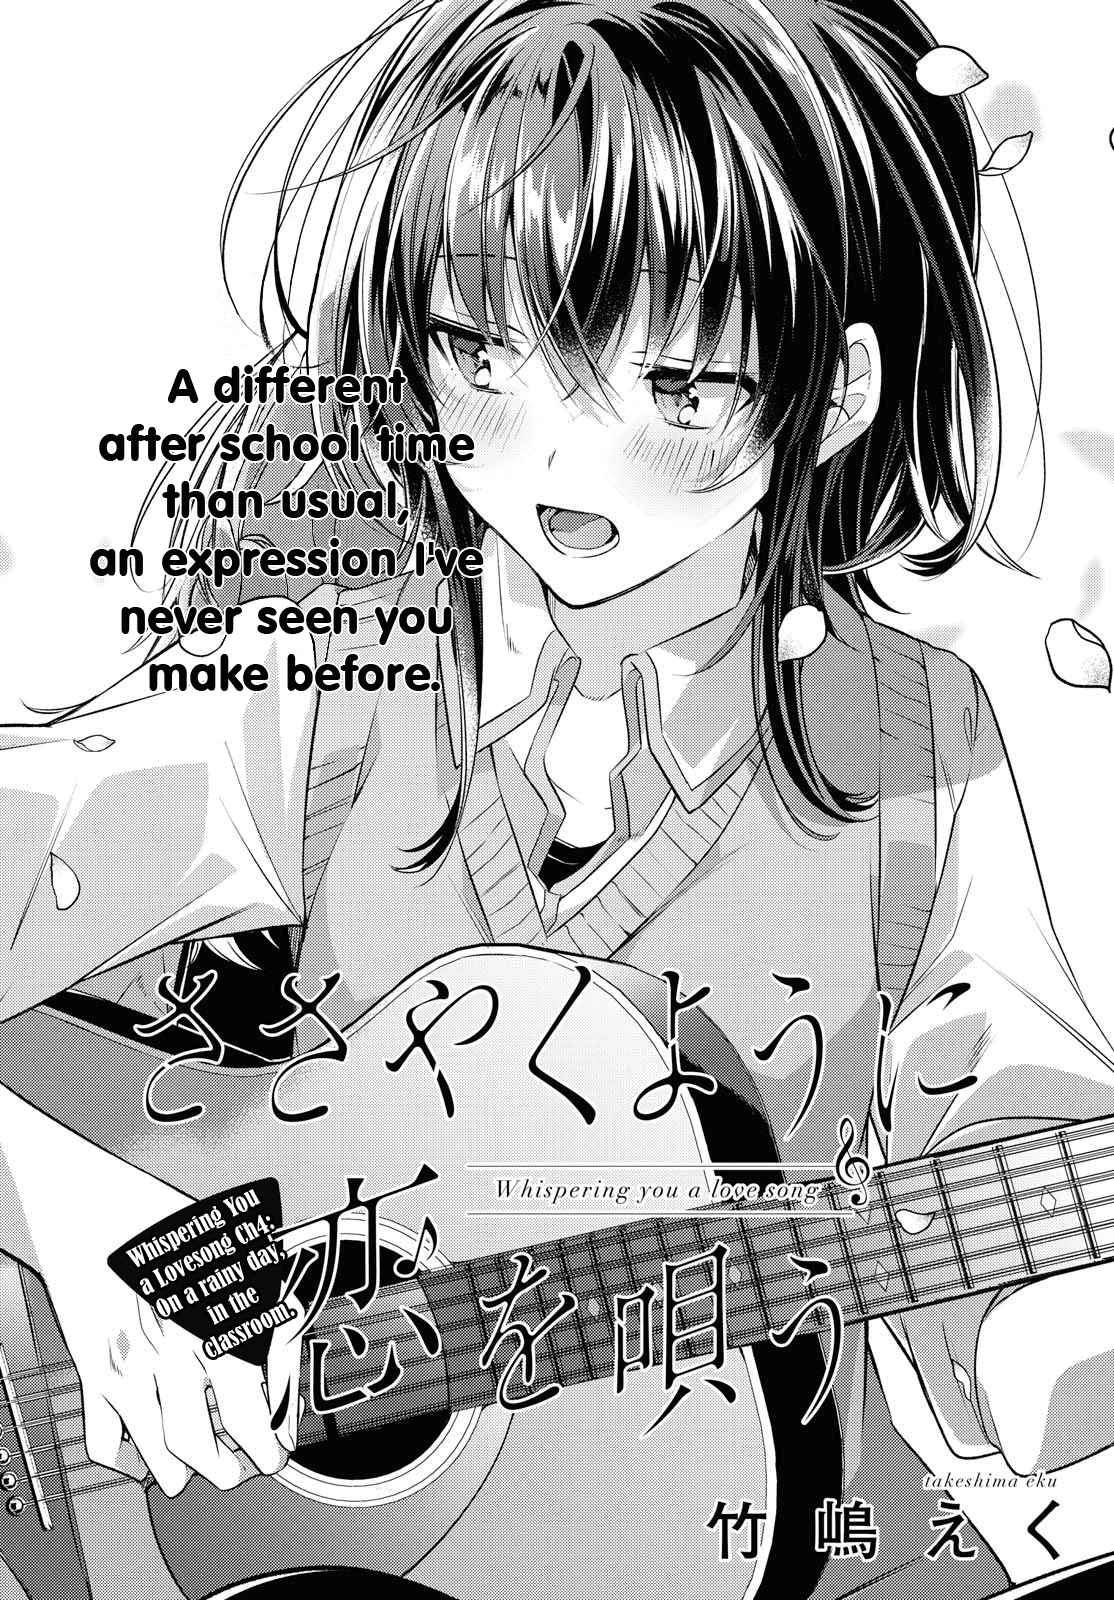 Whispering You a Love Song Vol. 1 Ch. 4 On a rainy day, in the classroom.